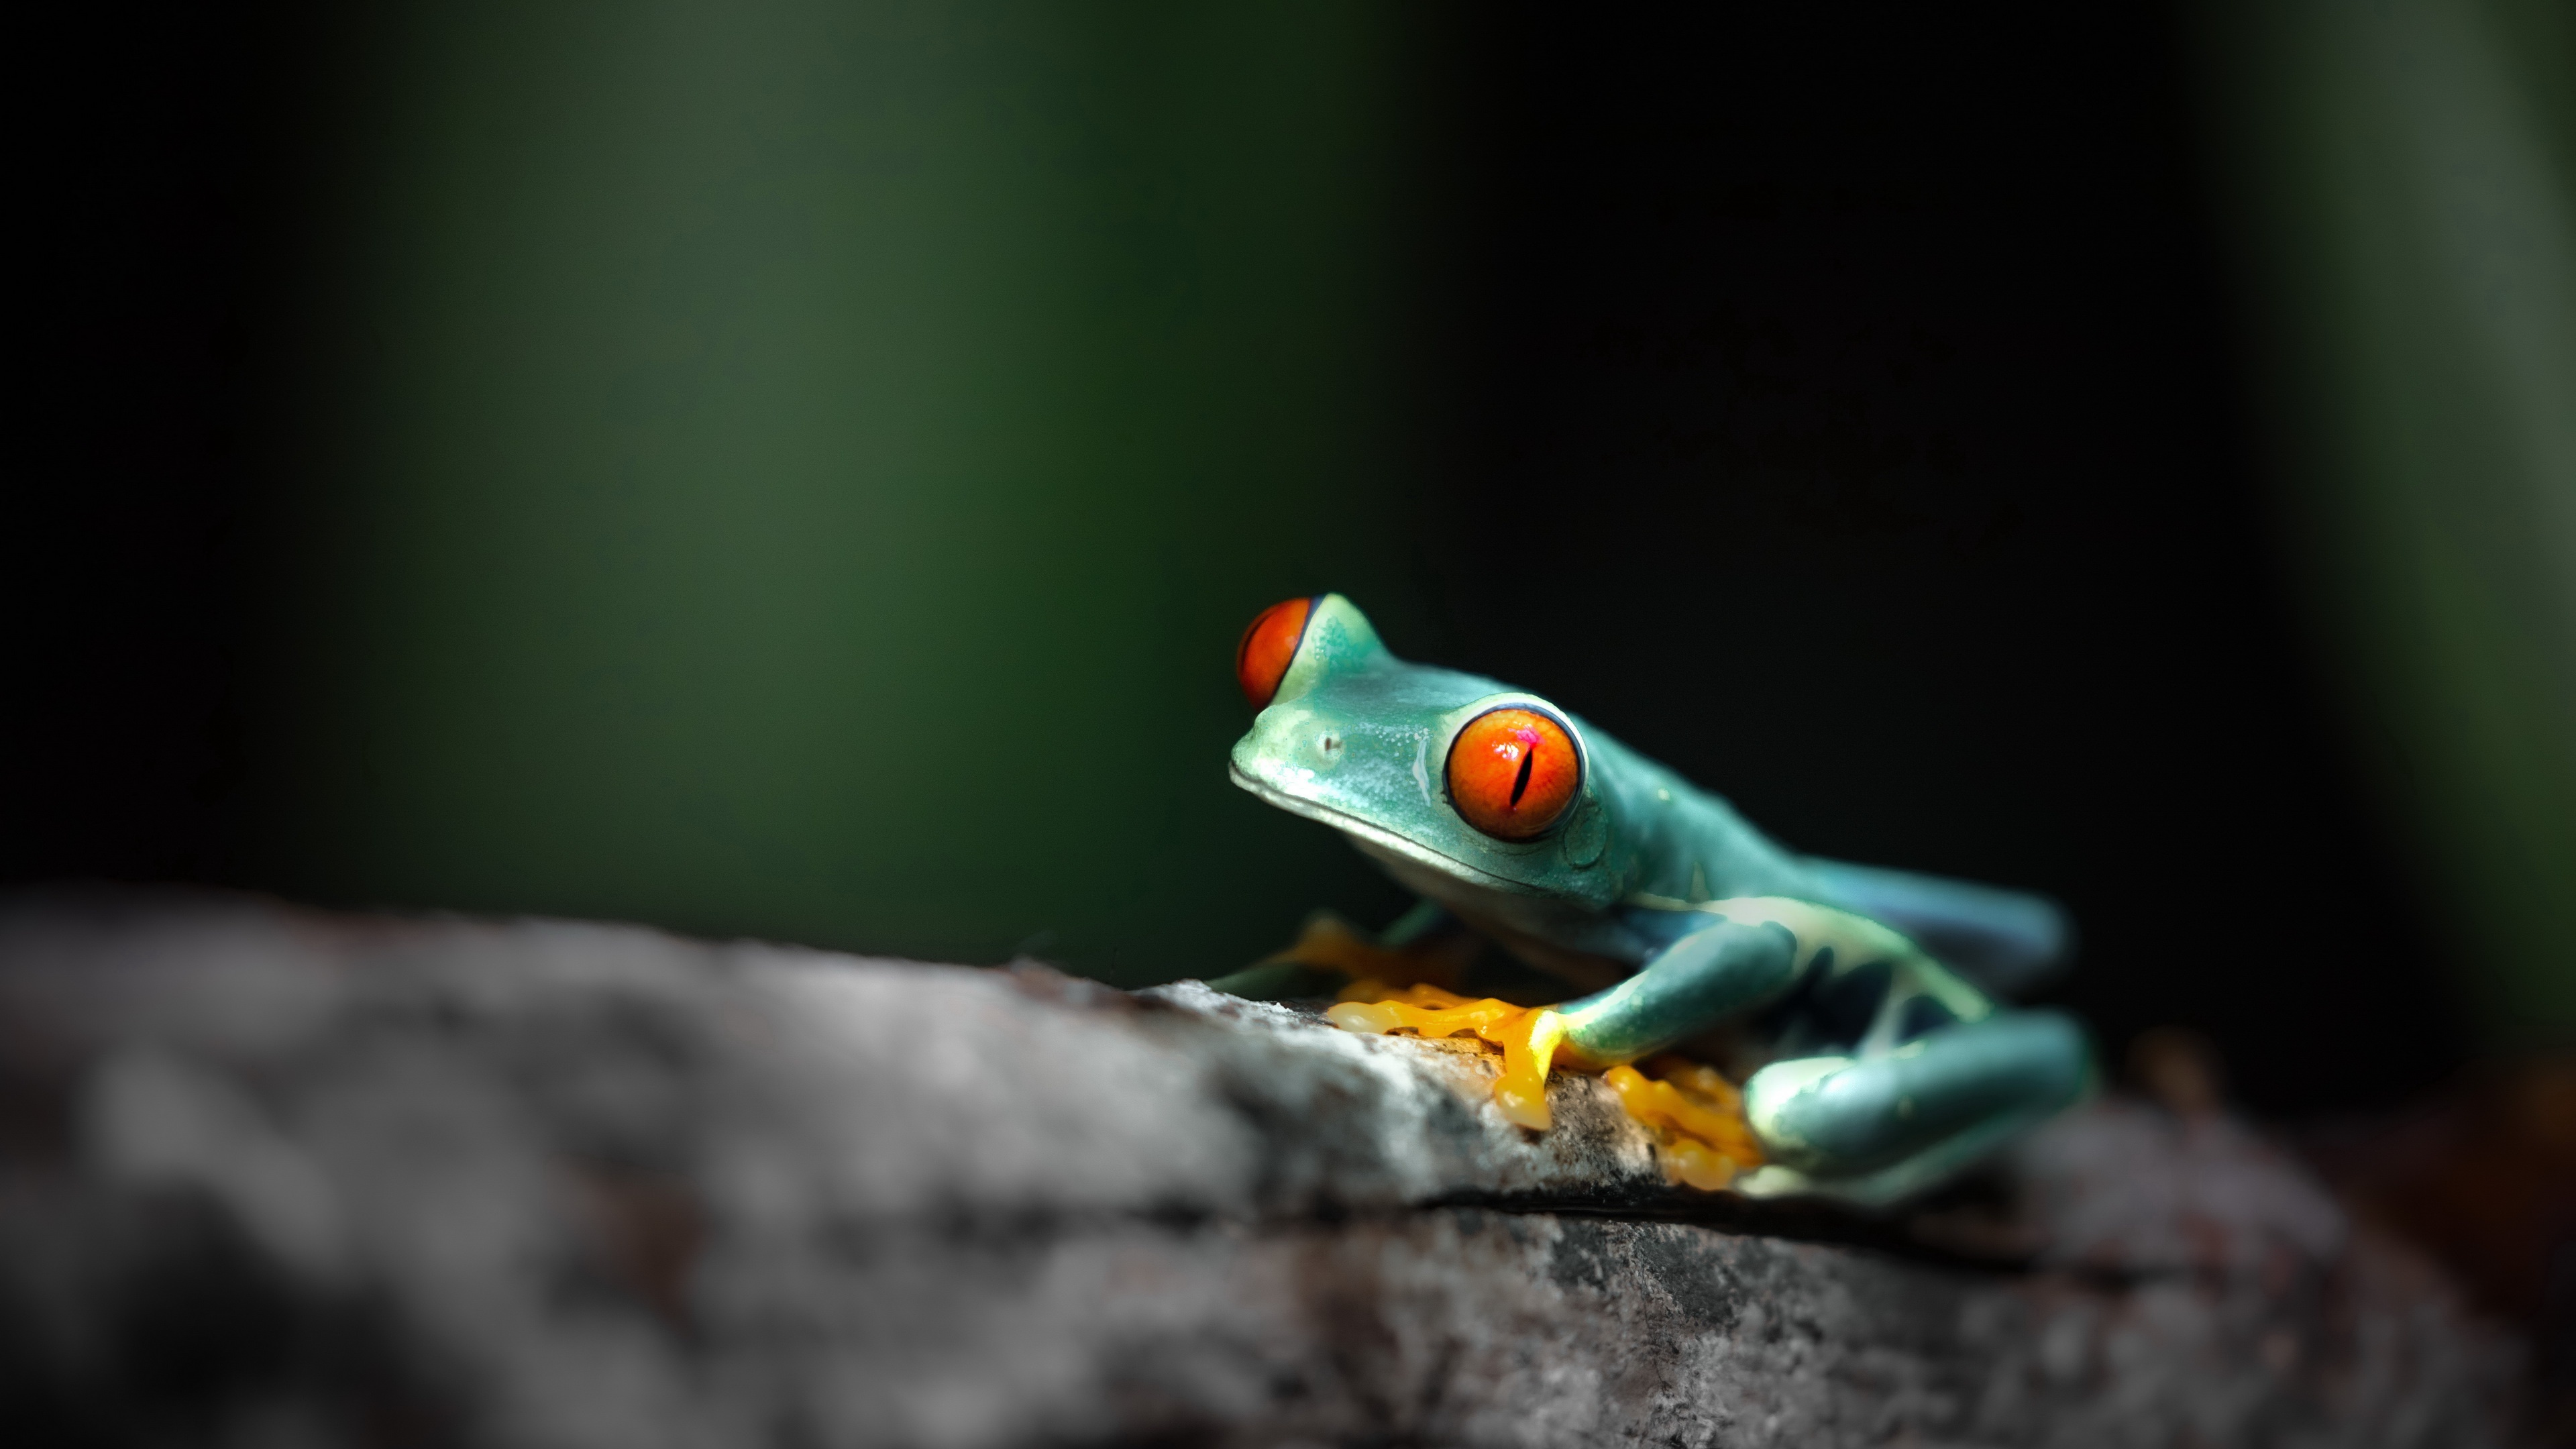 70 4K frog wallpapers, Stunning visuals, High-quality resolution, Frog-themed collection, 3840x2160 4K Desktop